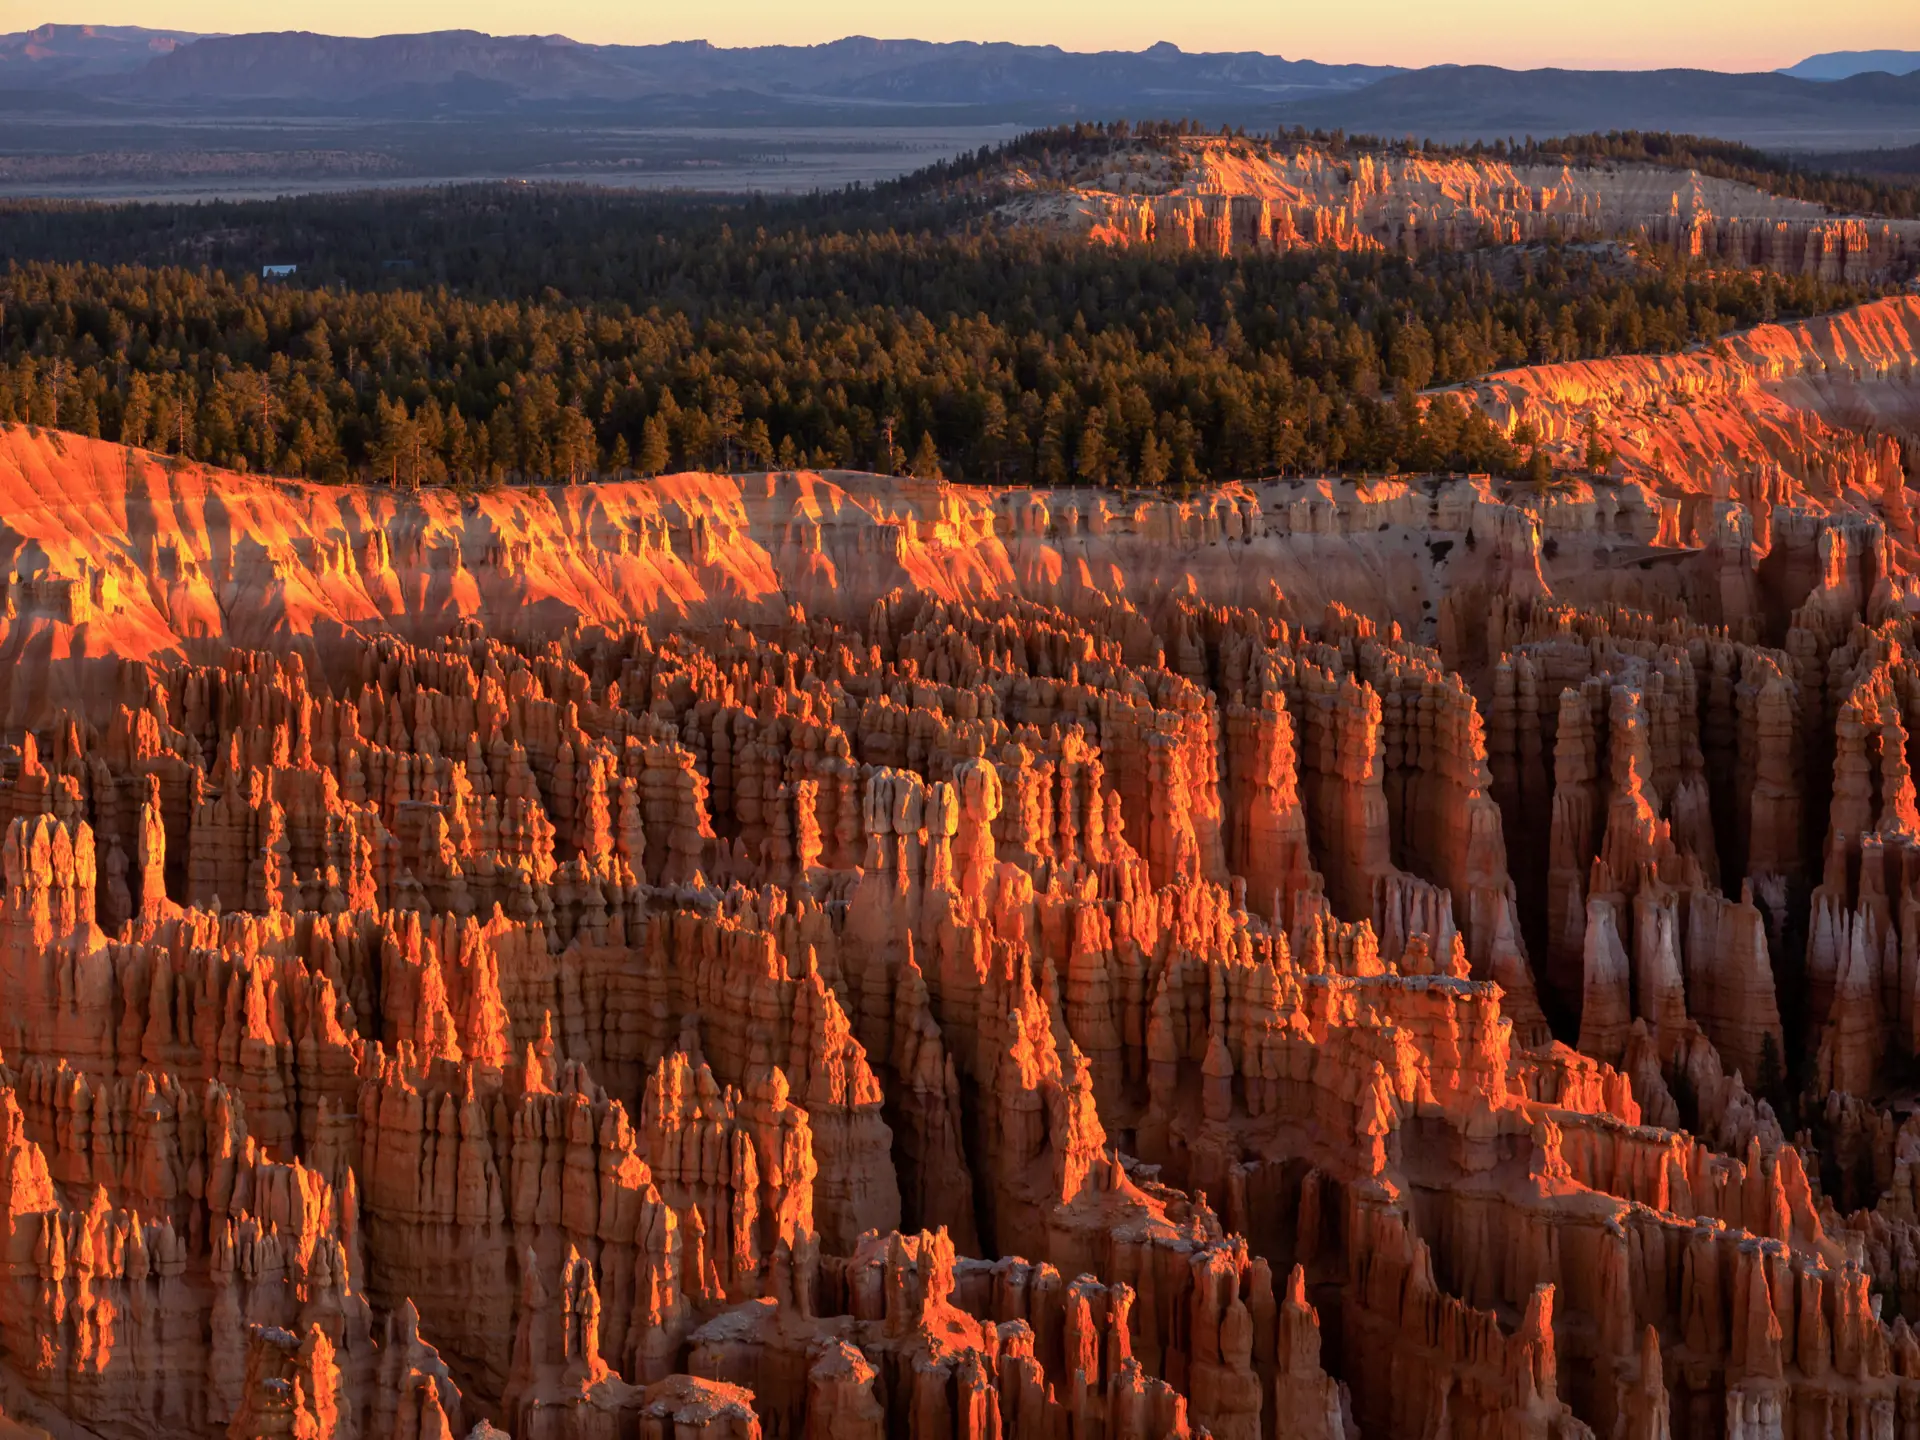 Solpopgang ved Bryce Canyon National Park - shutterstock_1034221942.jpg